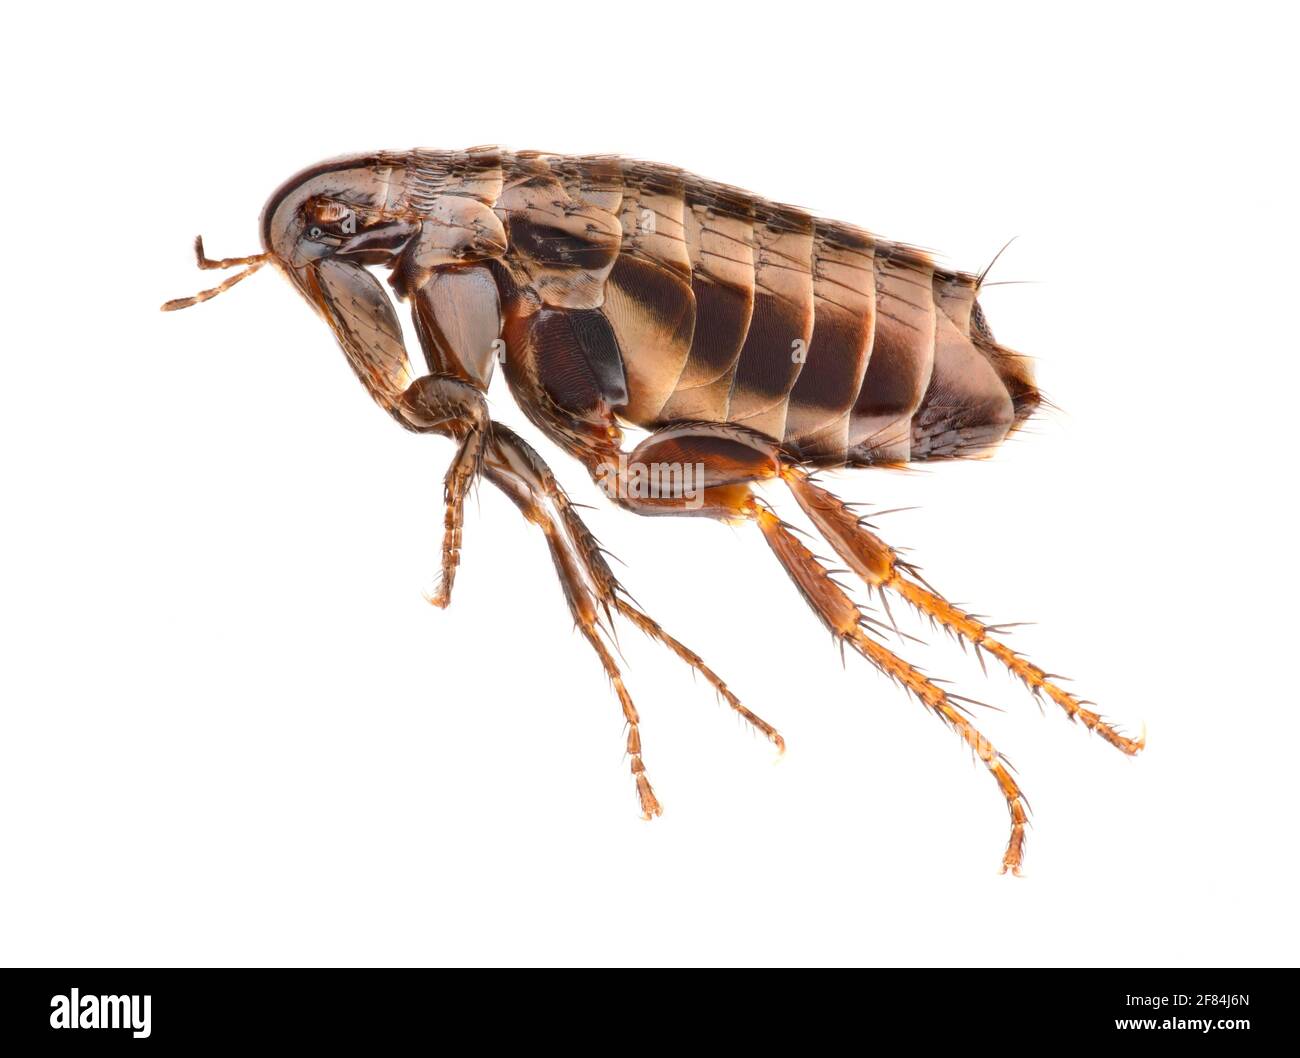 Flea (Siphonaptera) in side view against white background Stock Photo